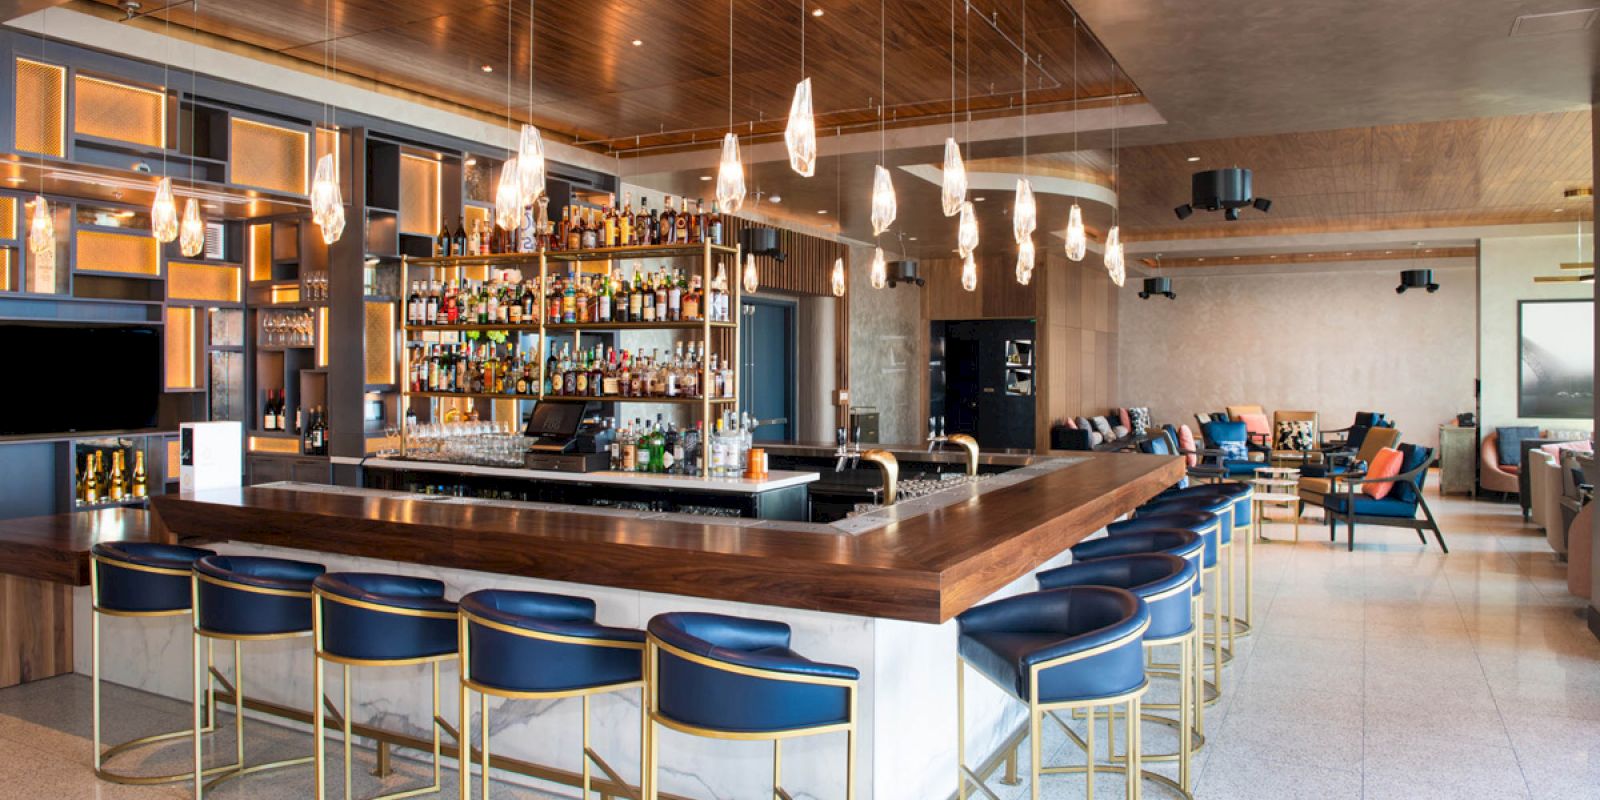 This image shows a modern bar with wooden and metallic decor, stylish seating, hanging lights, and a fully stocked bar counter. The ambiance is cozy.